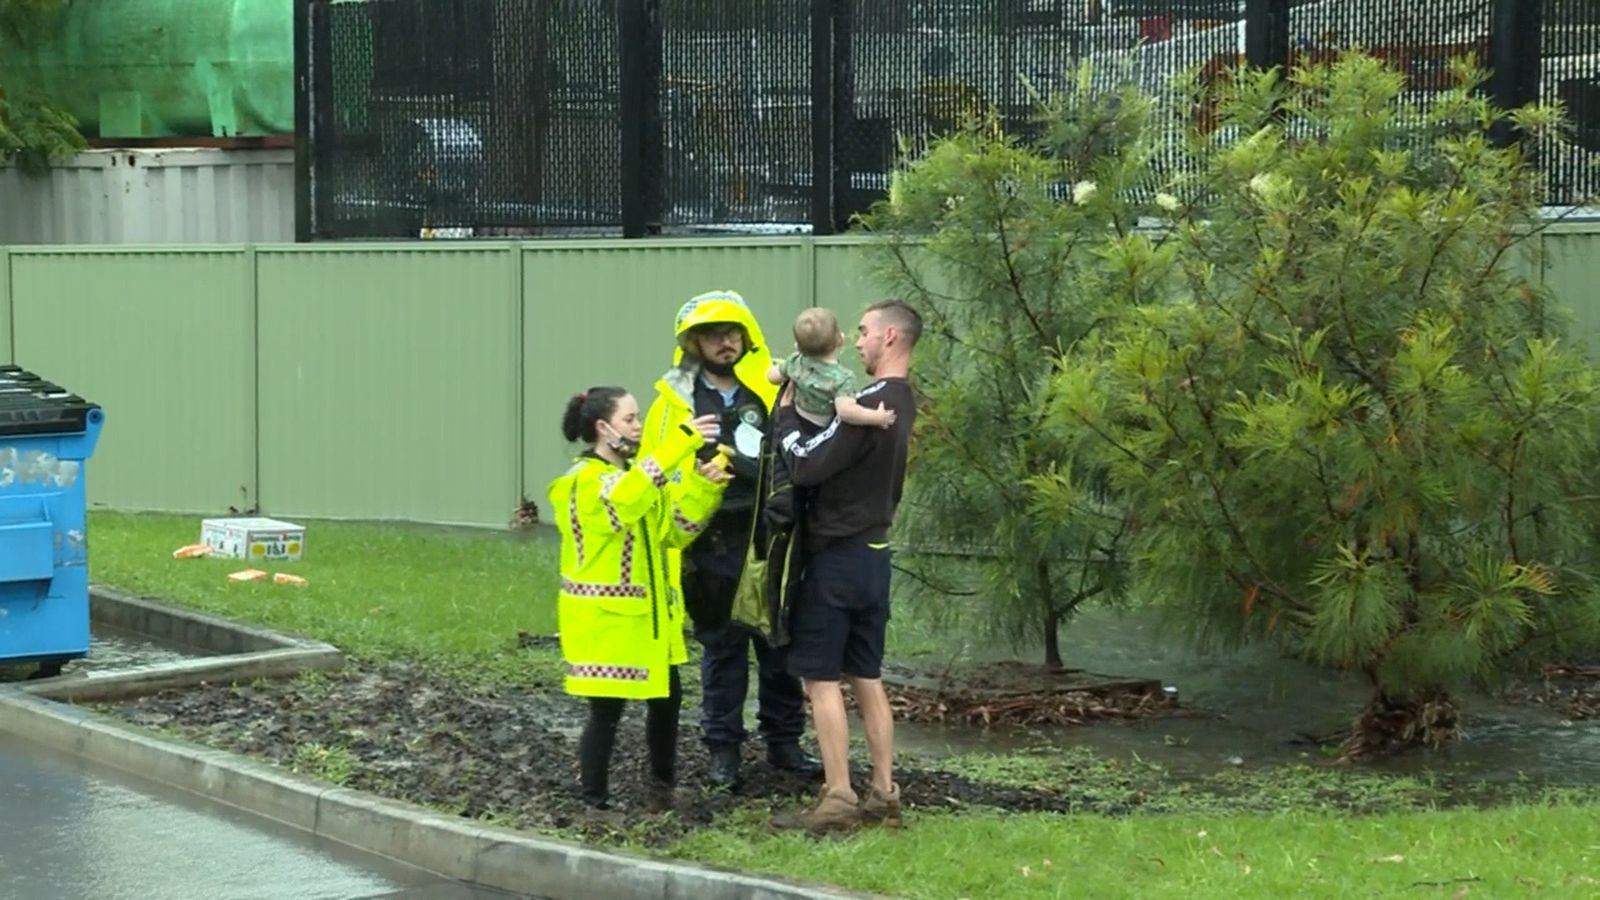 Emergency services helped to evacuate all the children. (9News)